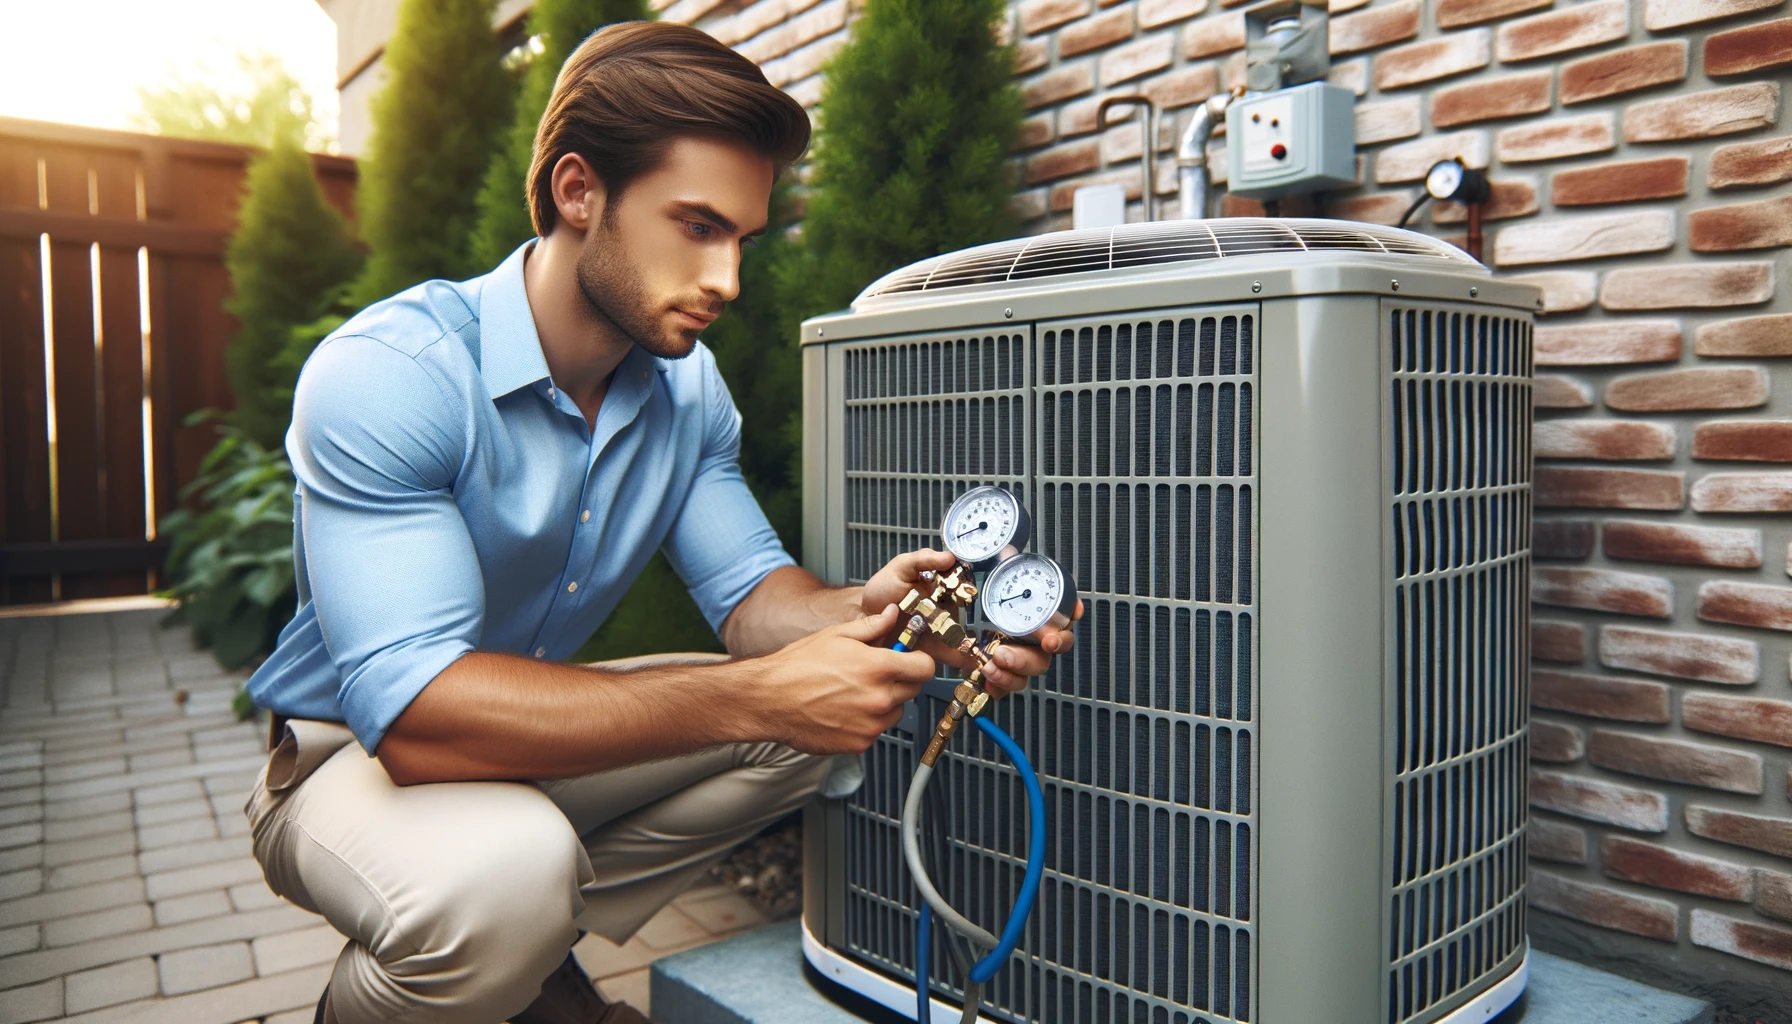 Get your HVAC system ready for summer